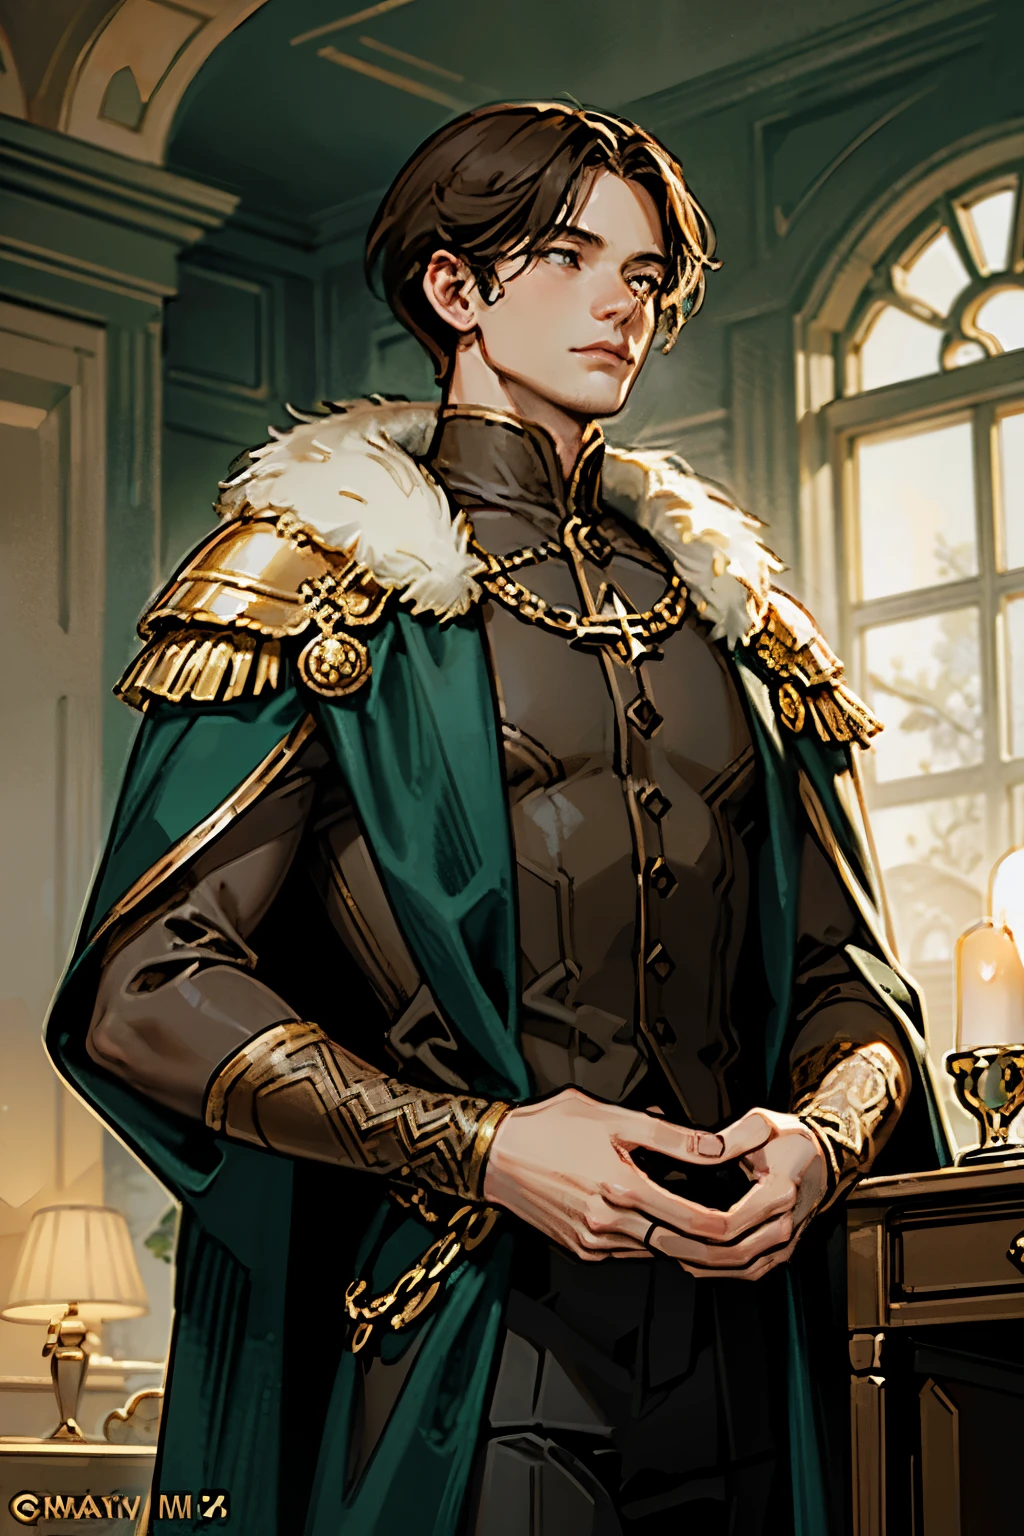 ((masterpieces)), best quality, outstanding illustration, soft focus, romanticism, opulent and exquisite atmosphere, soft light and warm lighting, 1men, Muscular build with broad shoulders, giving him a commanding presence.
Short hair, chestnut hair, strong jawline.
 brown eyes .
italian renaisance deep green outfit , gold trimmings, A matching cloak with a fur collar drapes over his shoulders.